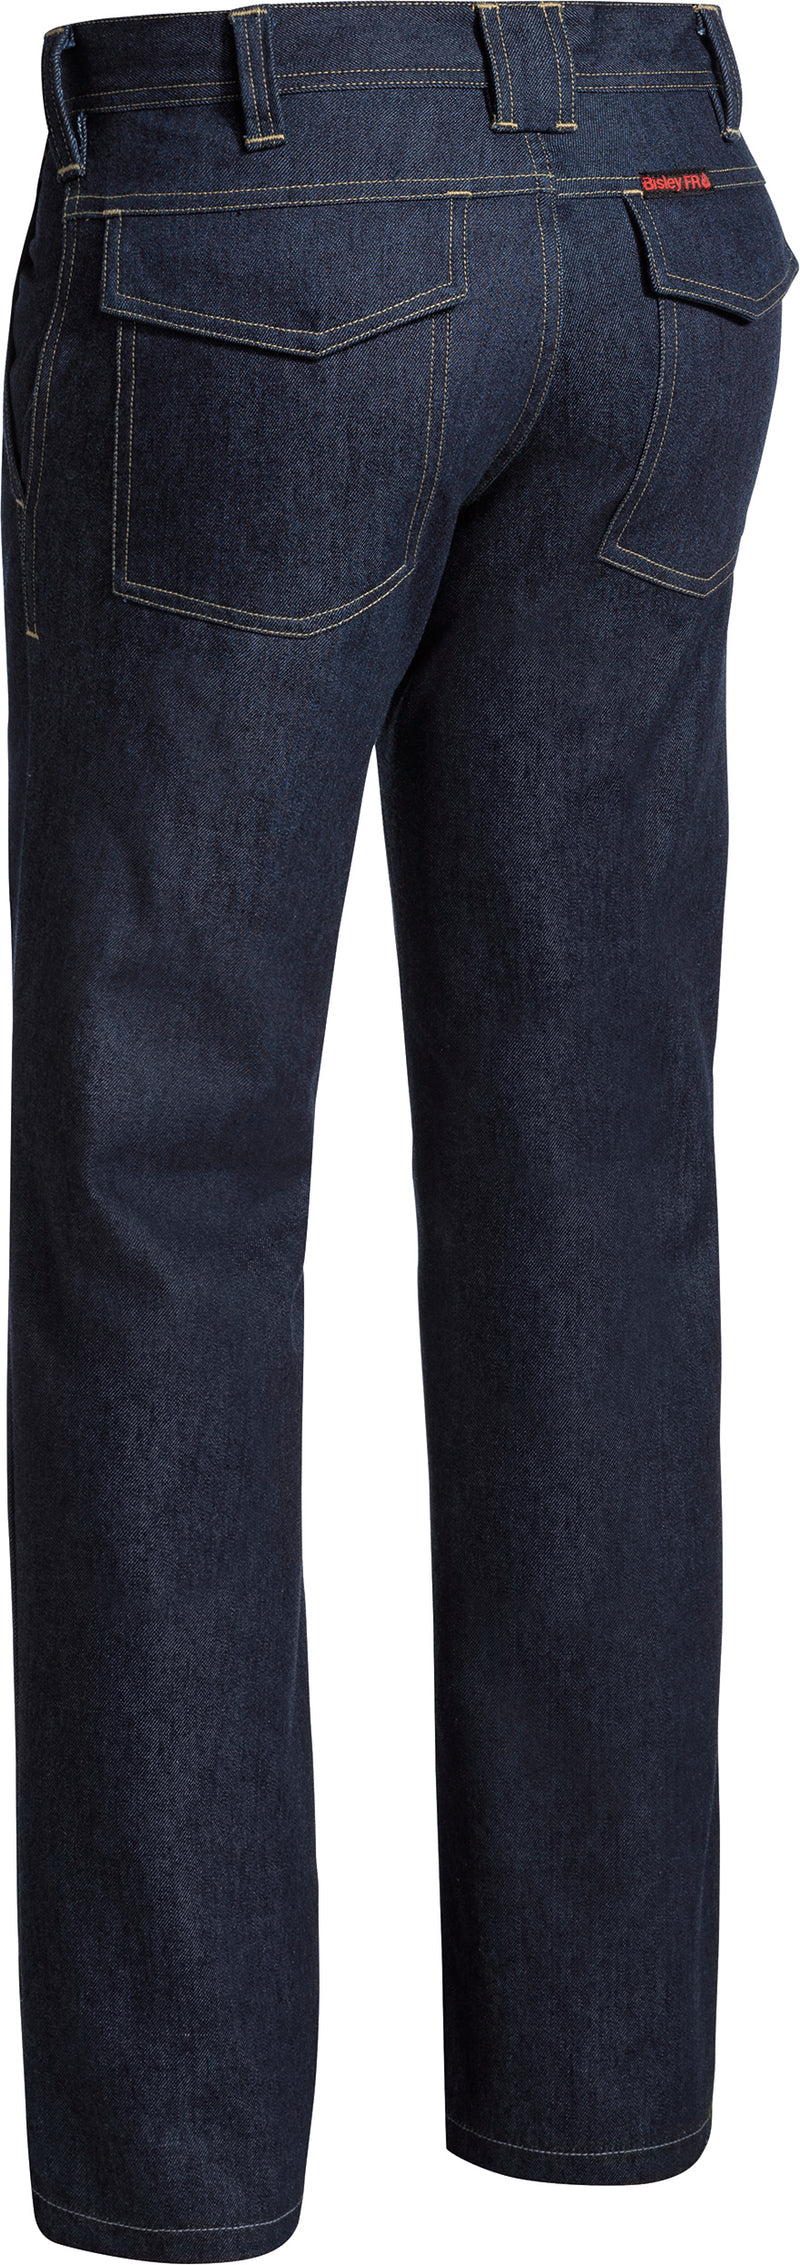 Load image into Gallery viewer, Wholesale BP8091 Bisley FR Denim Jeans - Stout Printed or Blank
